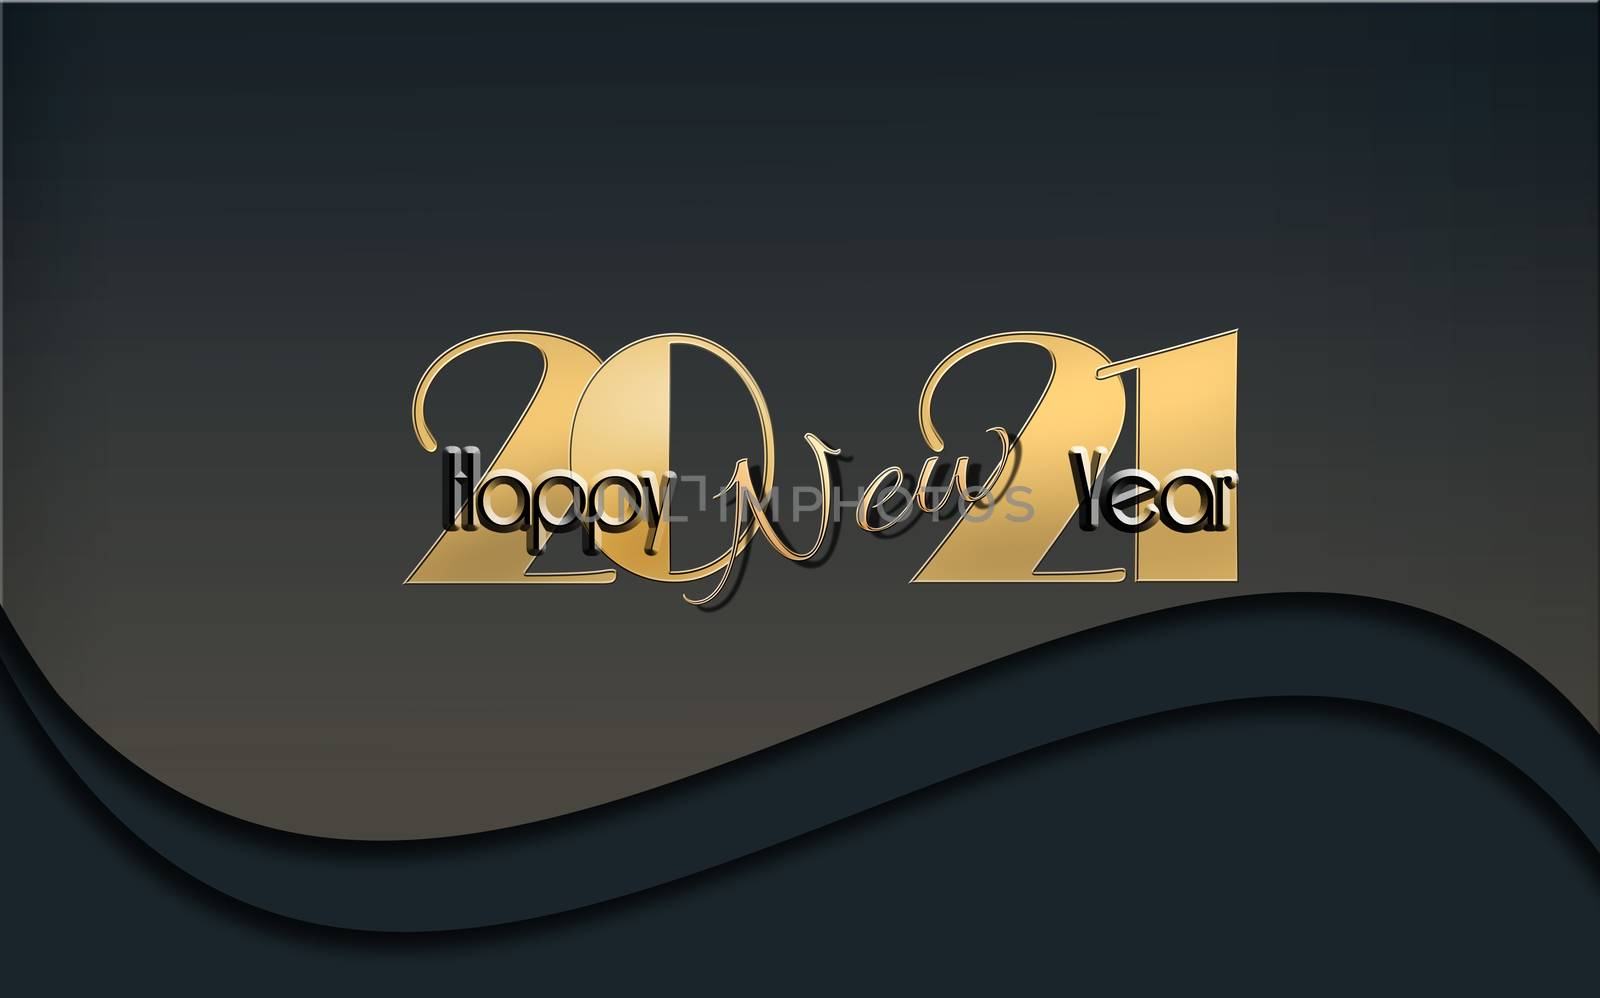 2021 New Year card with shining gold digit 2021 and text Happy New Year on dark black background. 3D Illustration